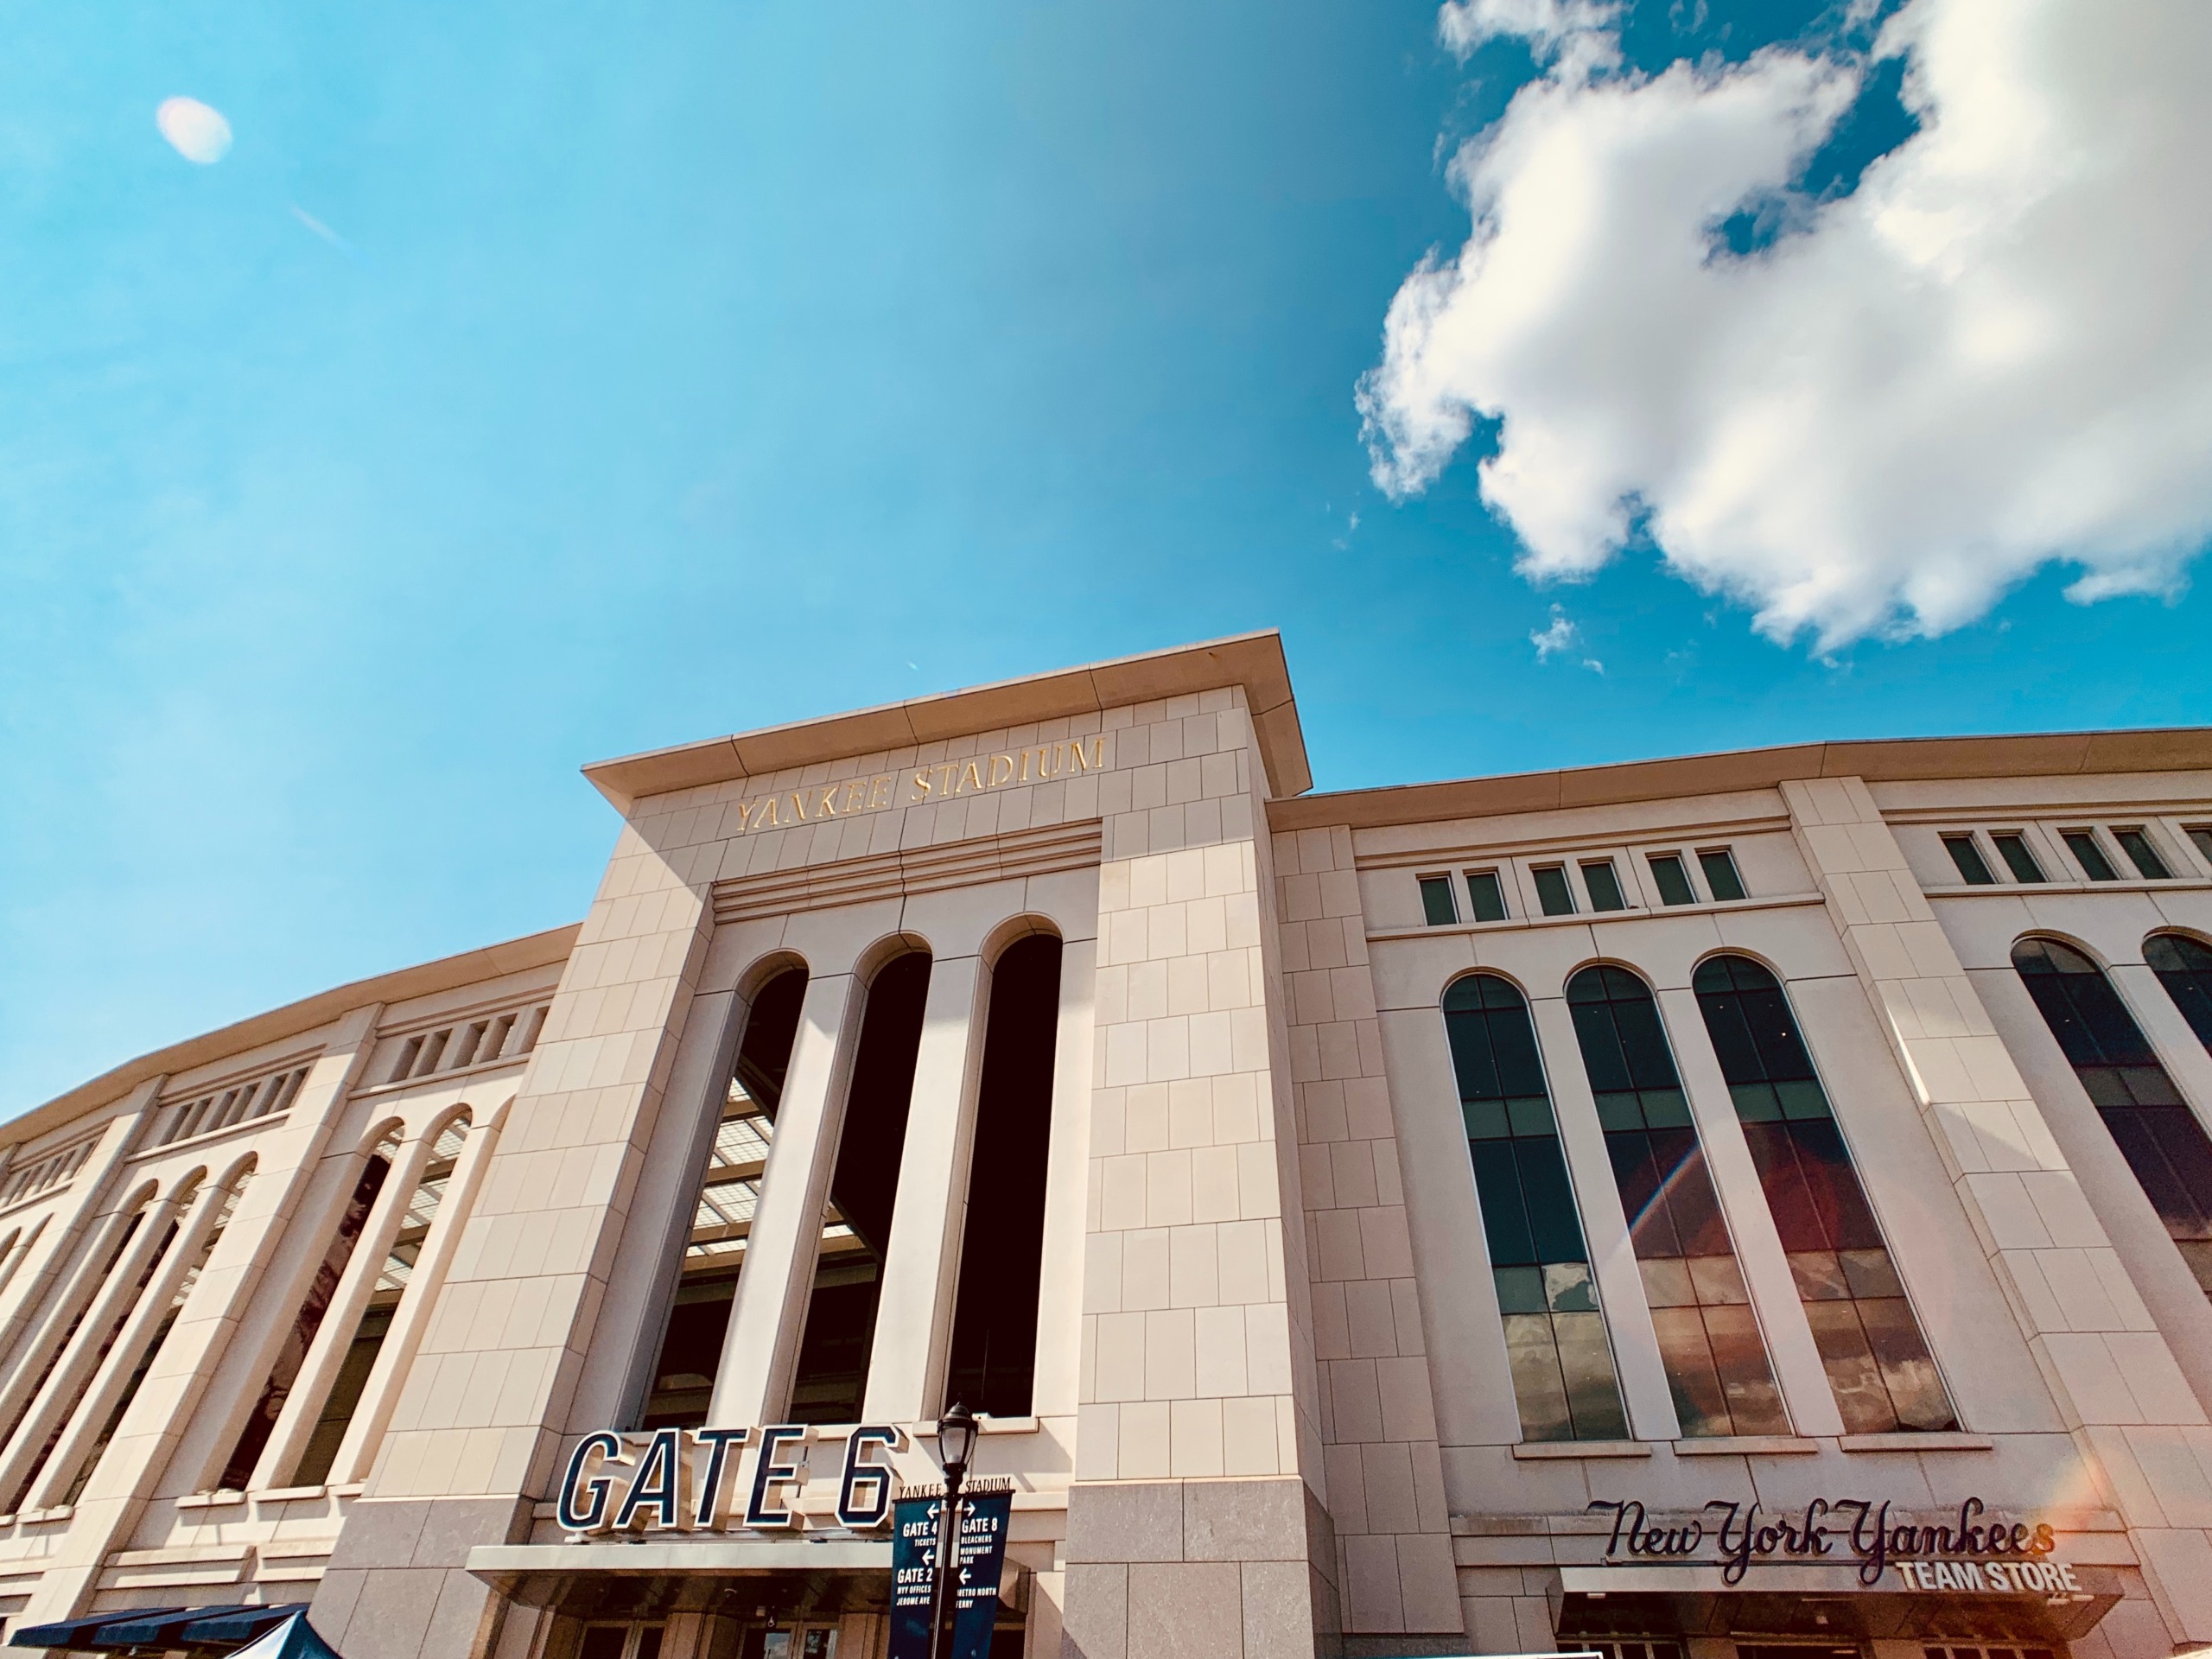 Stores near Yankee Stadium will still be able to sell Yankees